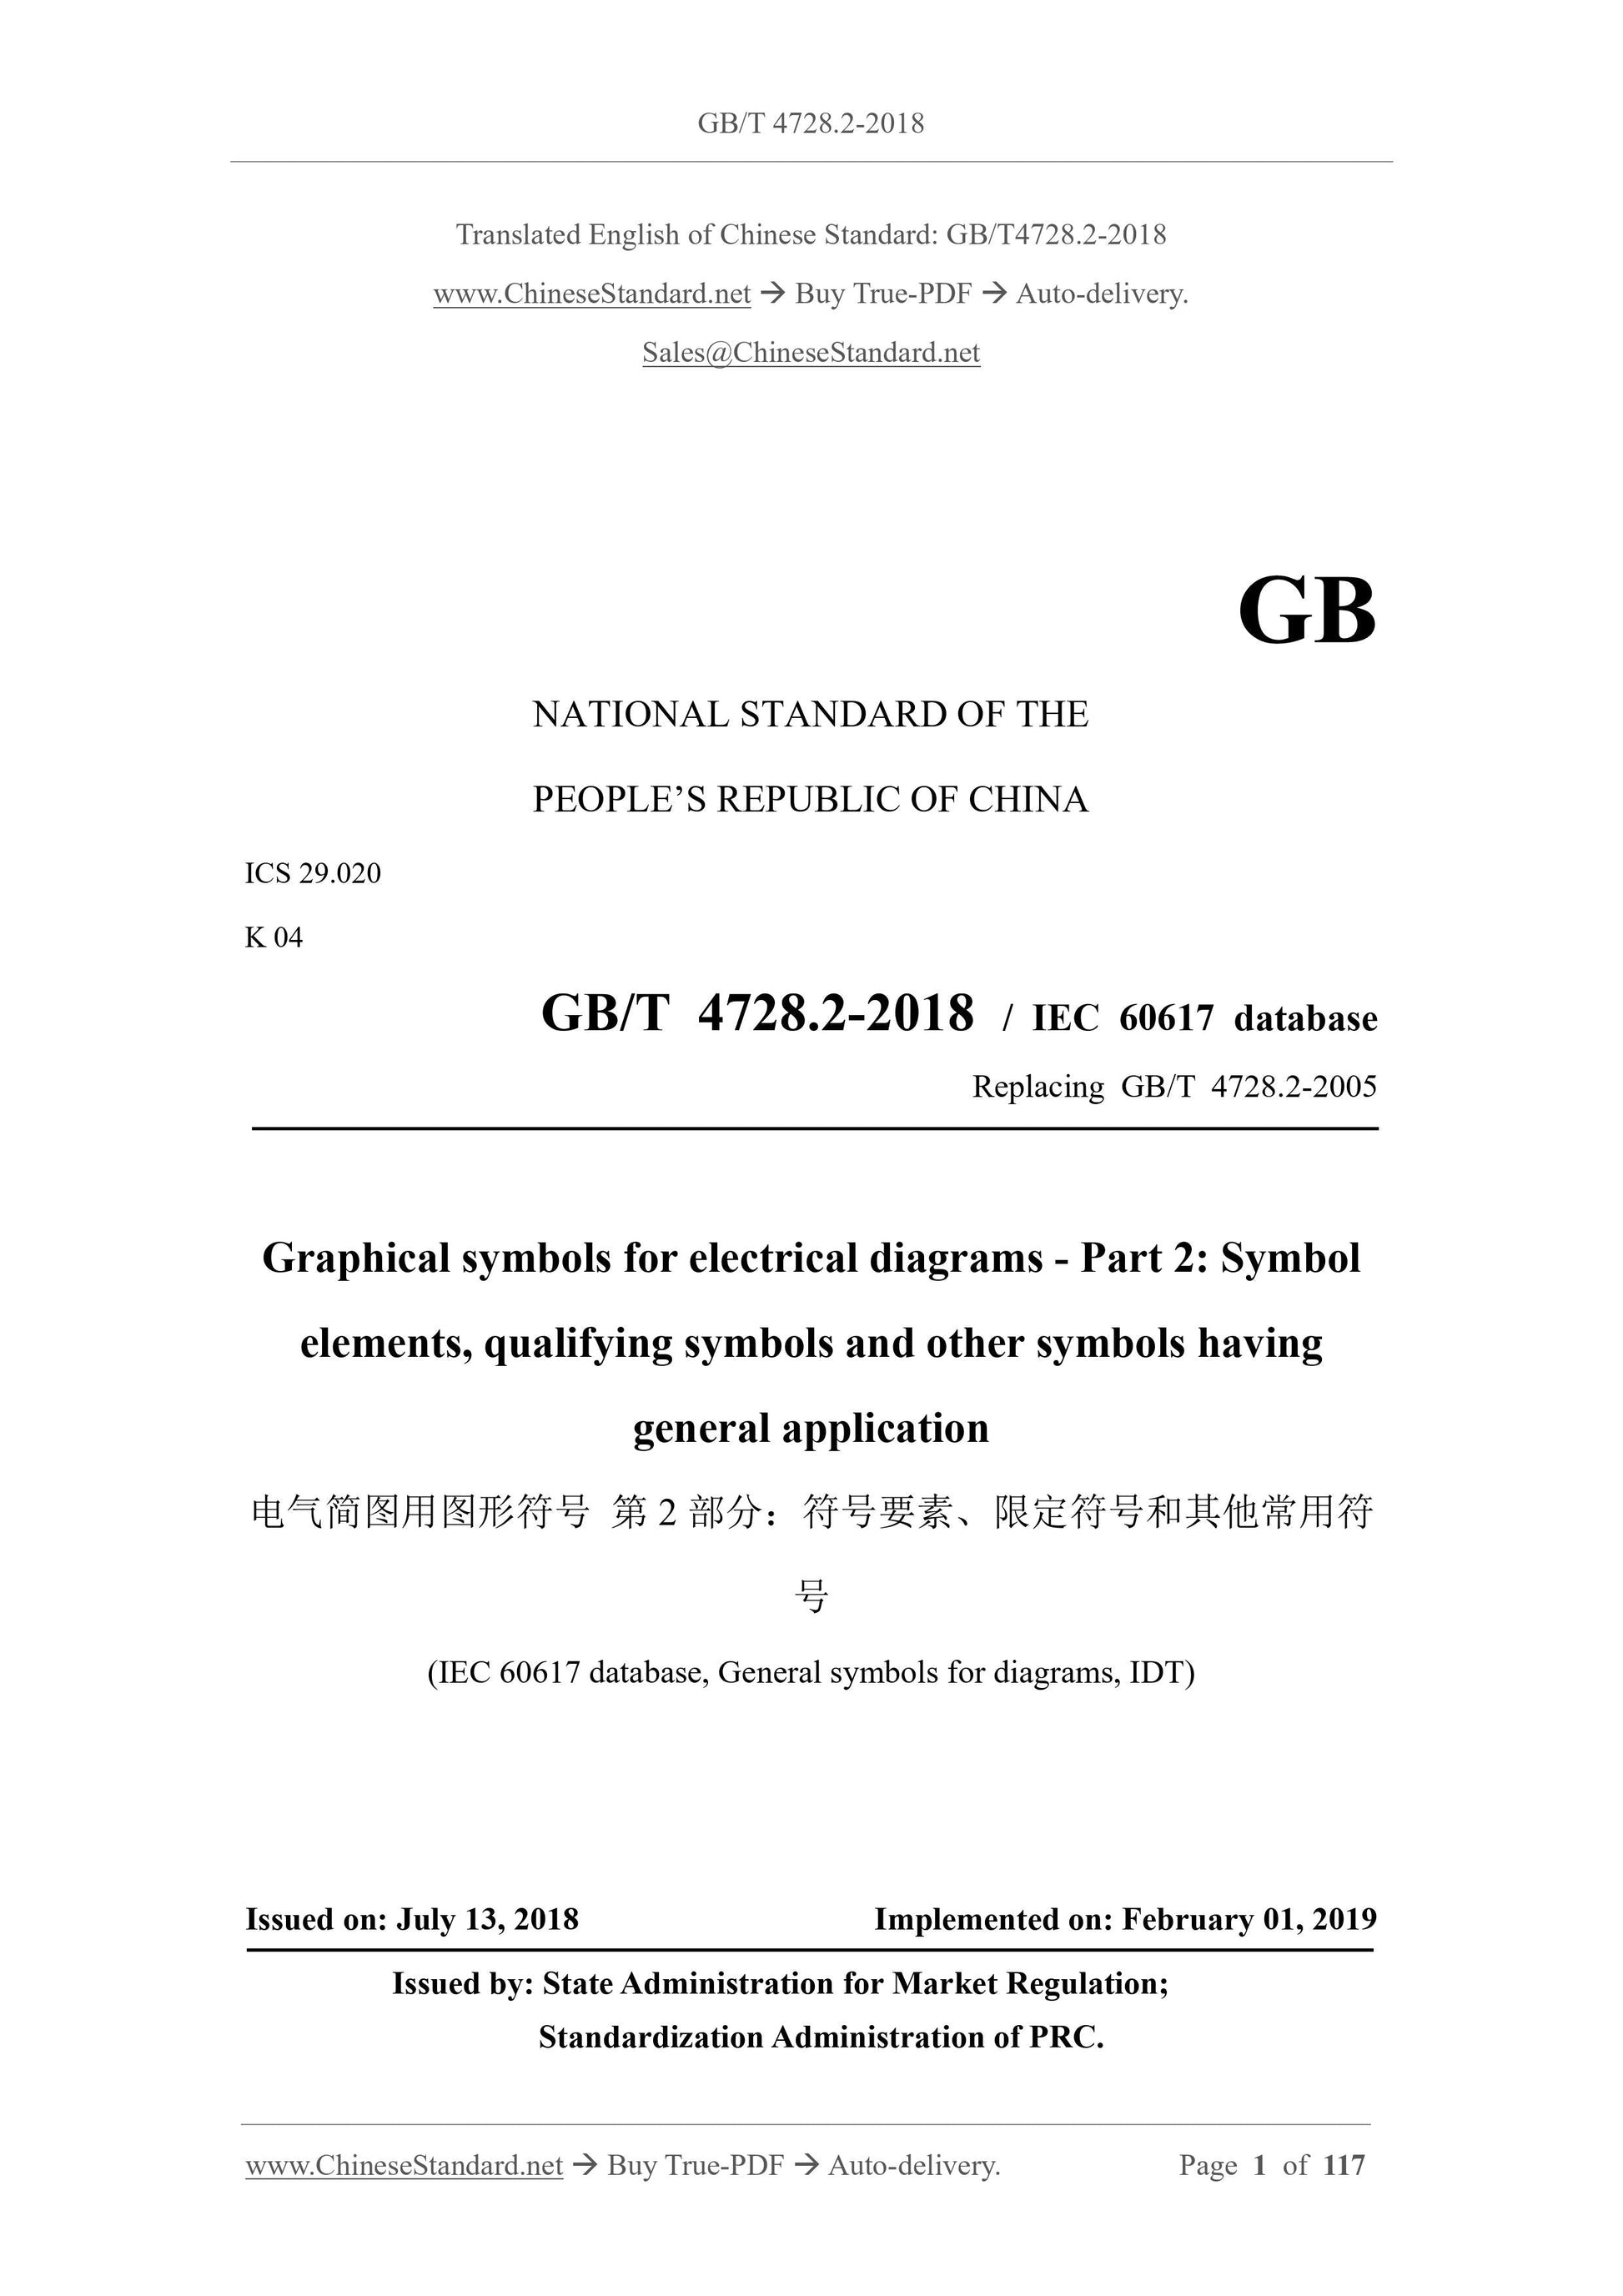 GB/T 4728.2-2018 Page 1